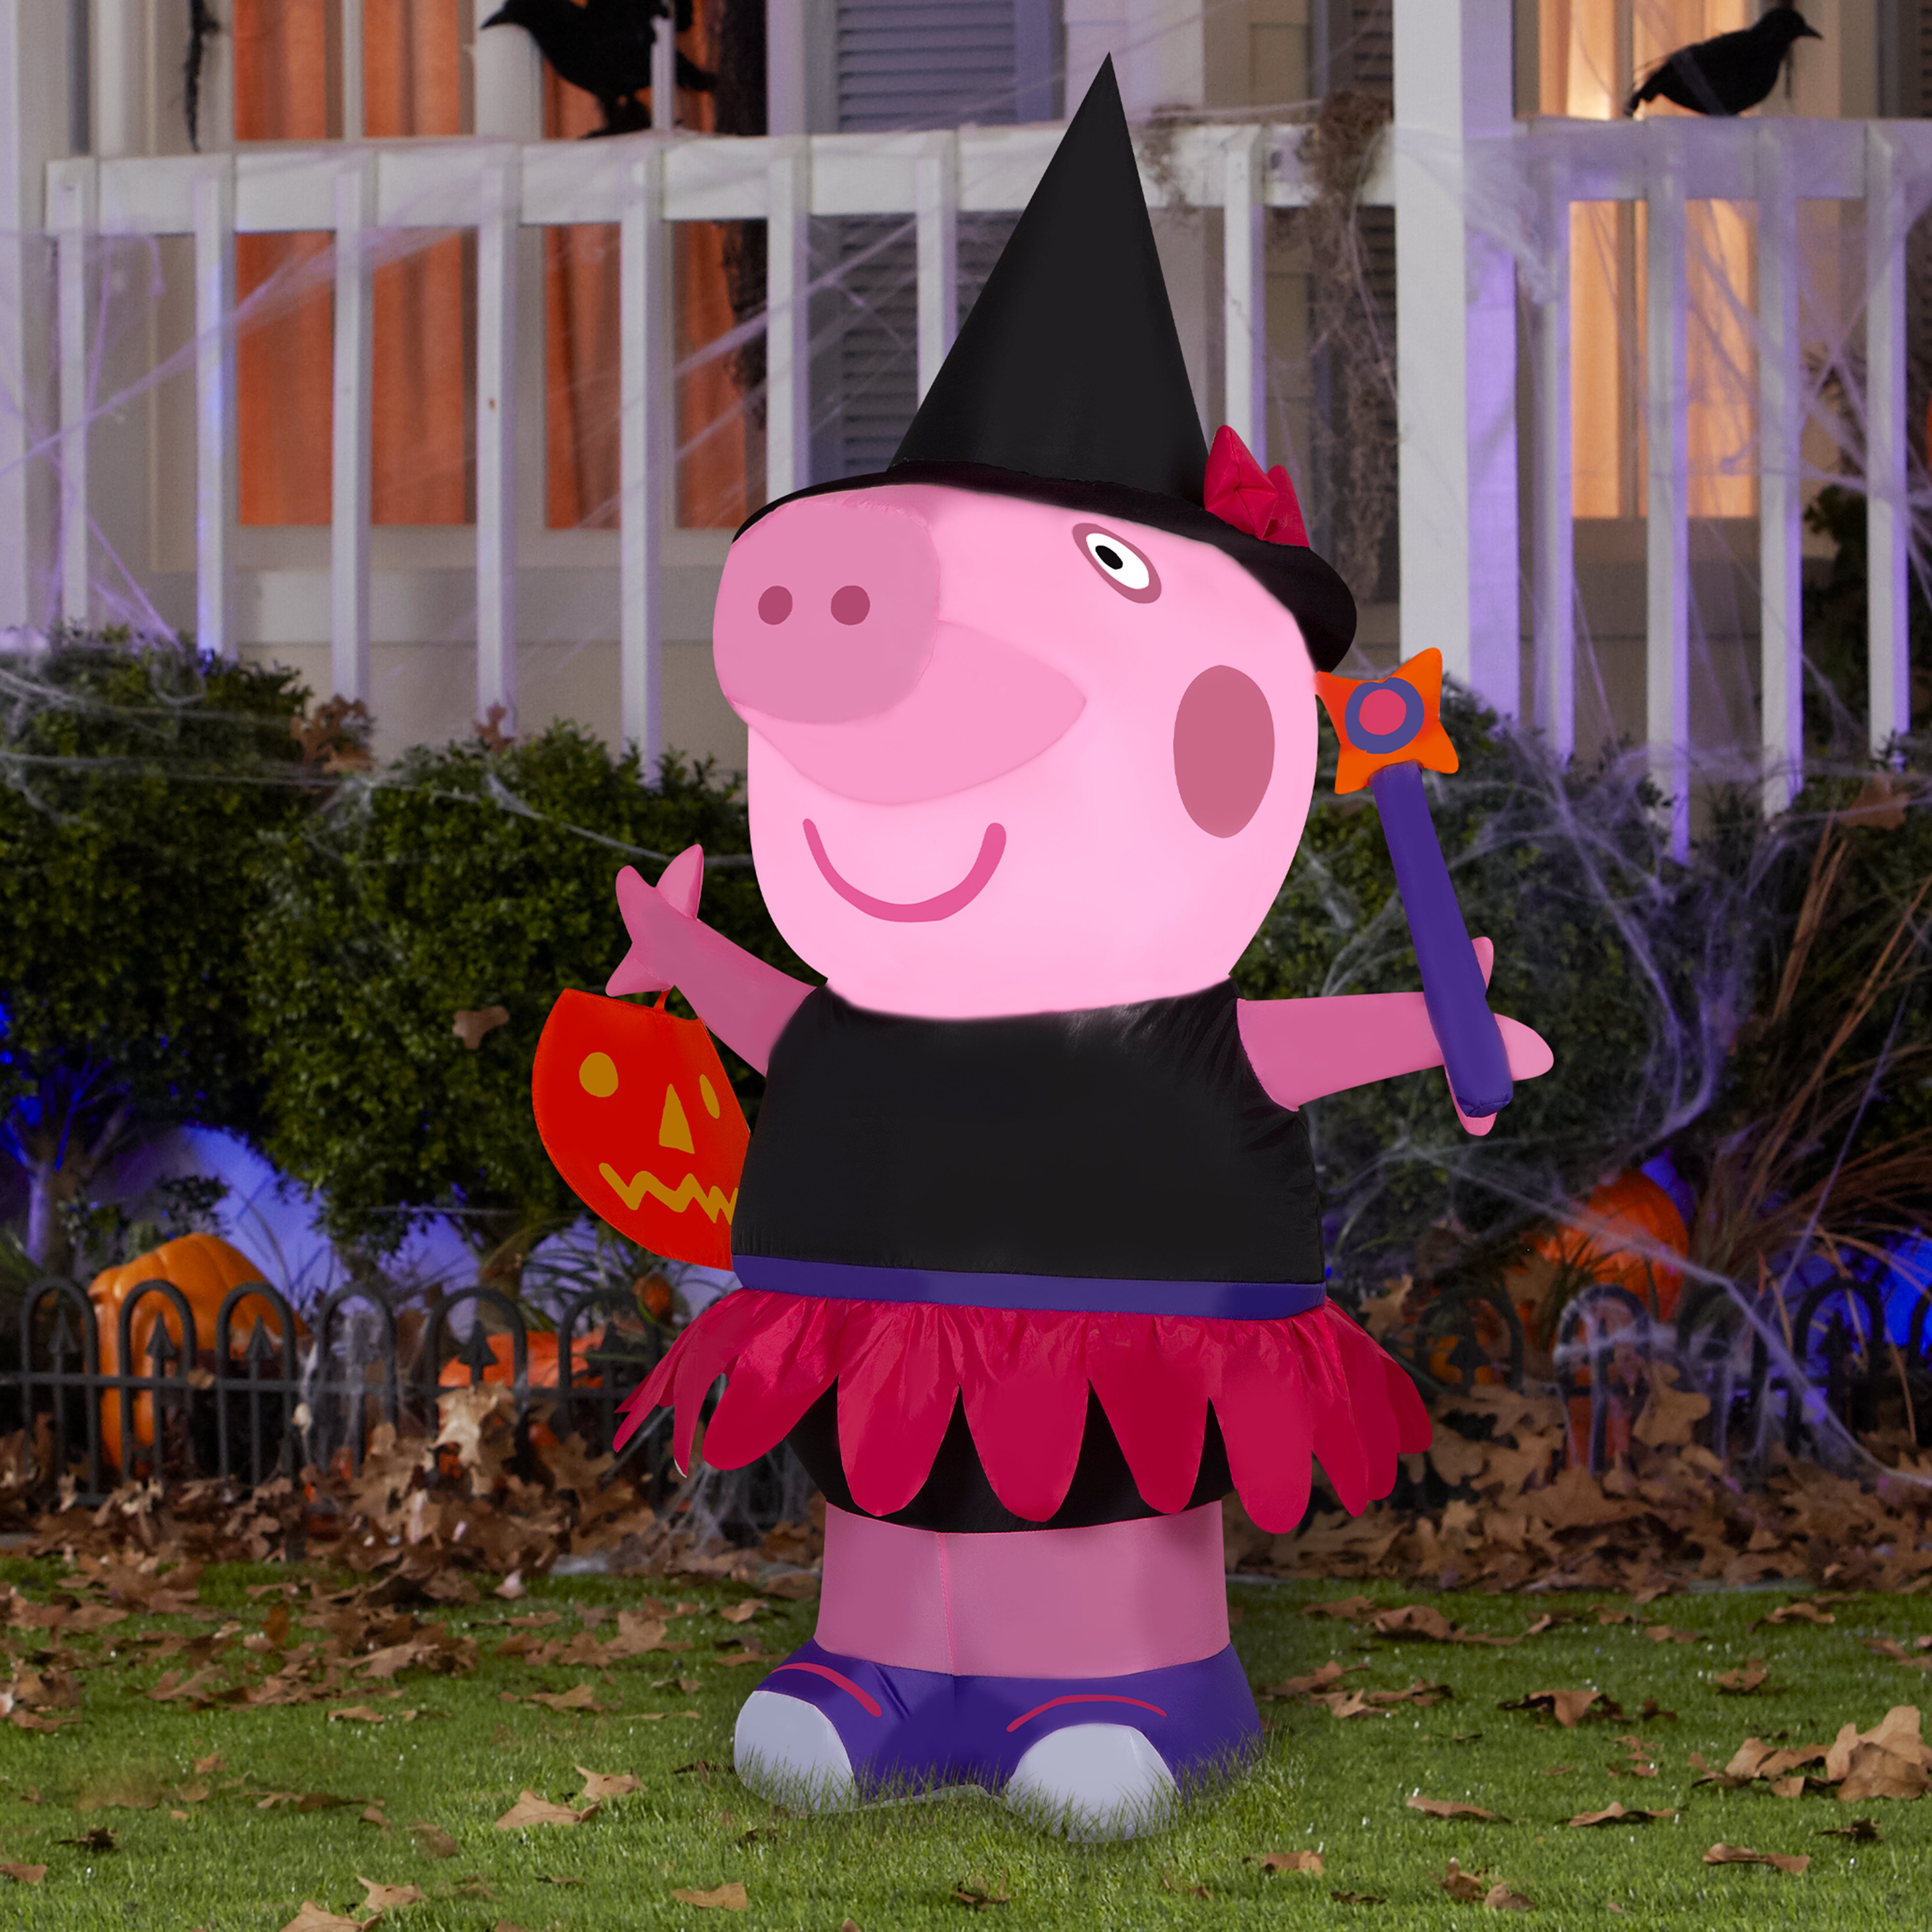 Gemmy Airblown Peppa Pig as Witch Peppa Pig, 4 ft Tall, Multi